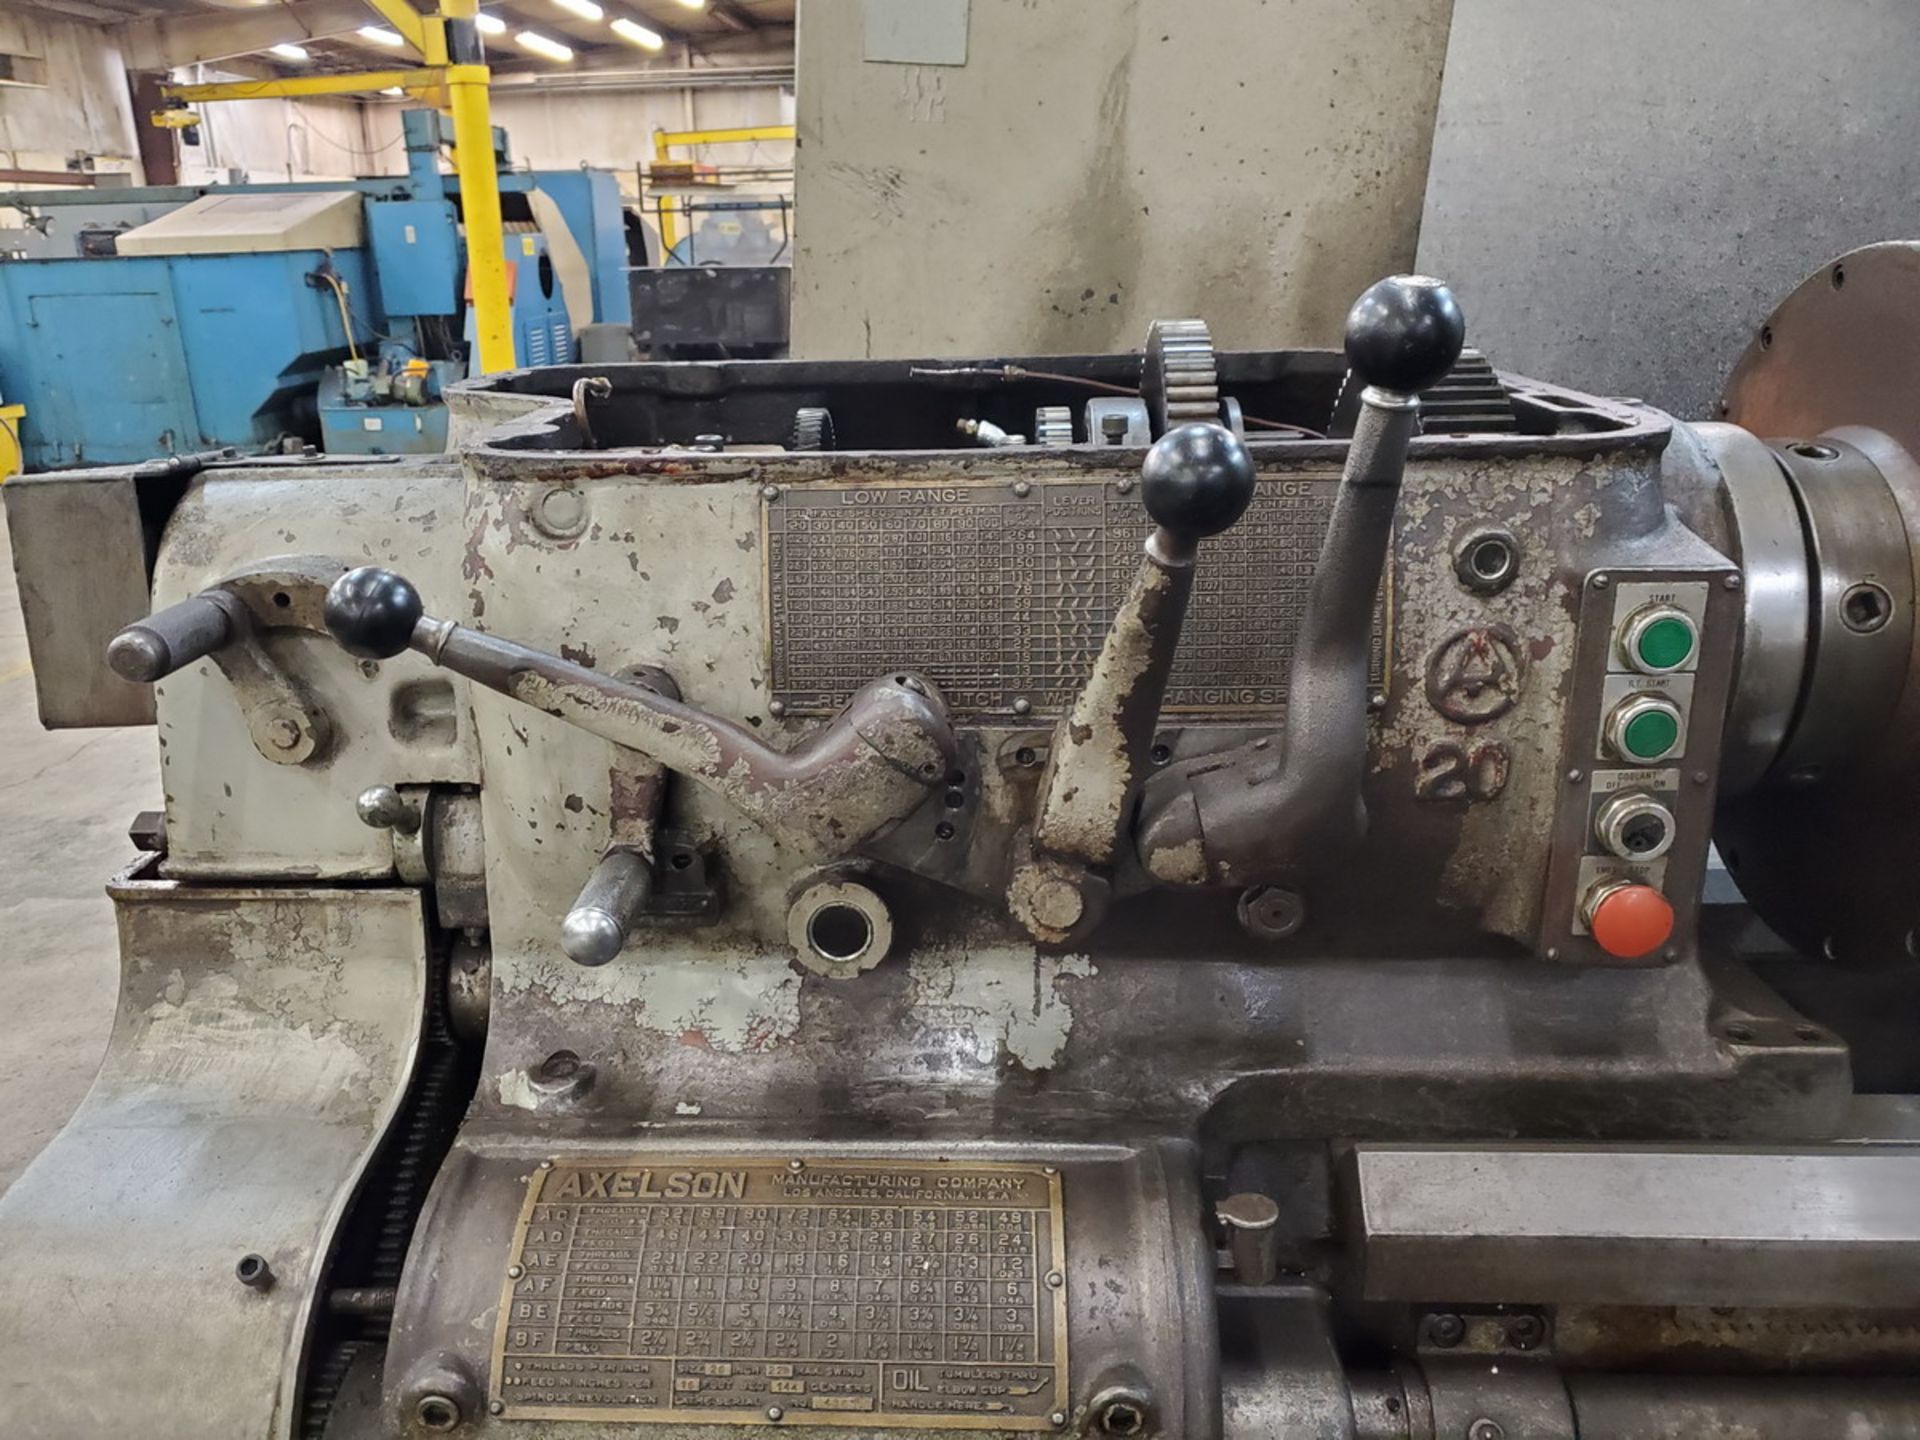 Axelson 20 20" Manual Lathe (Opening bid Includes Rigging Fee) - Image 9 of 15